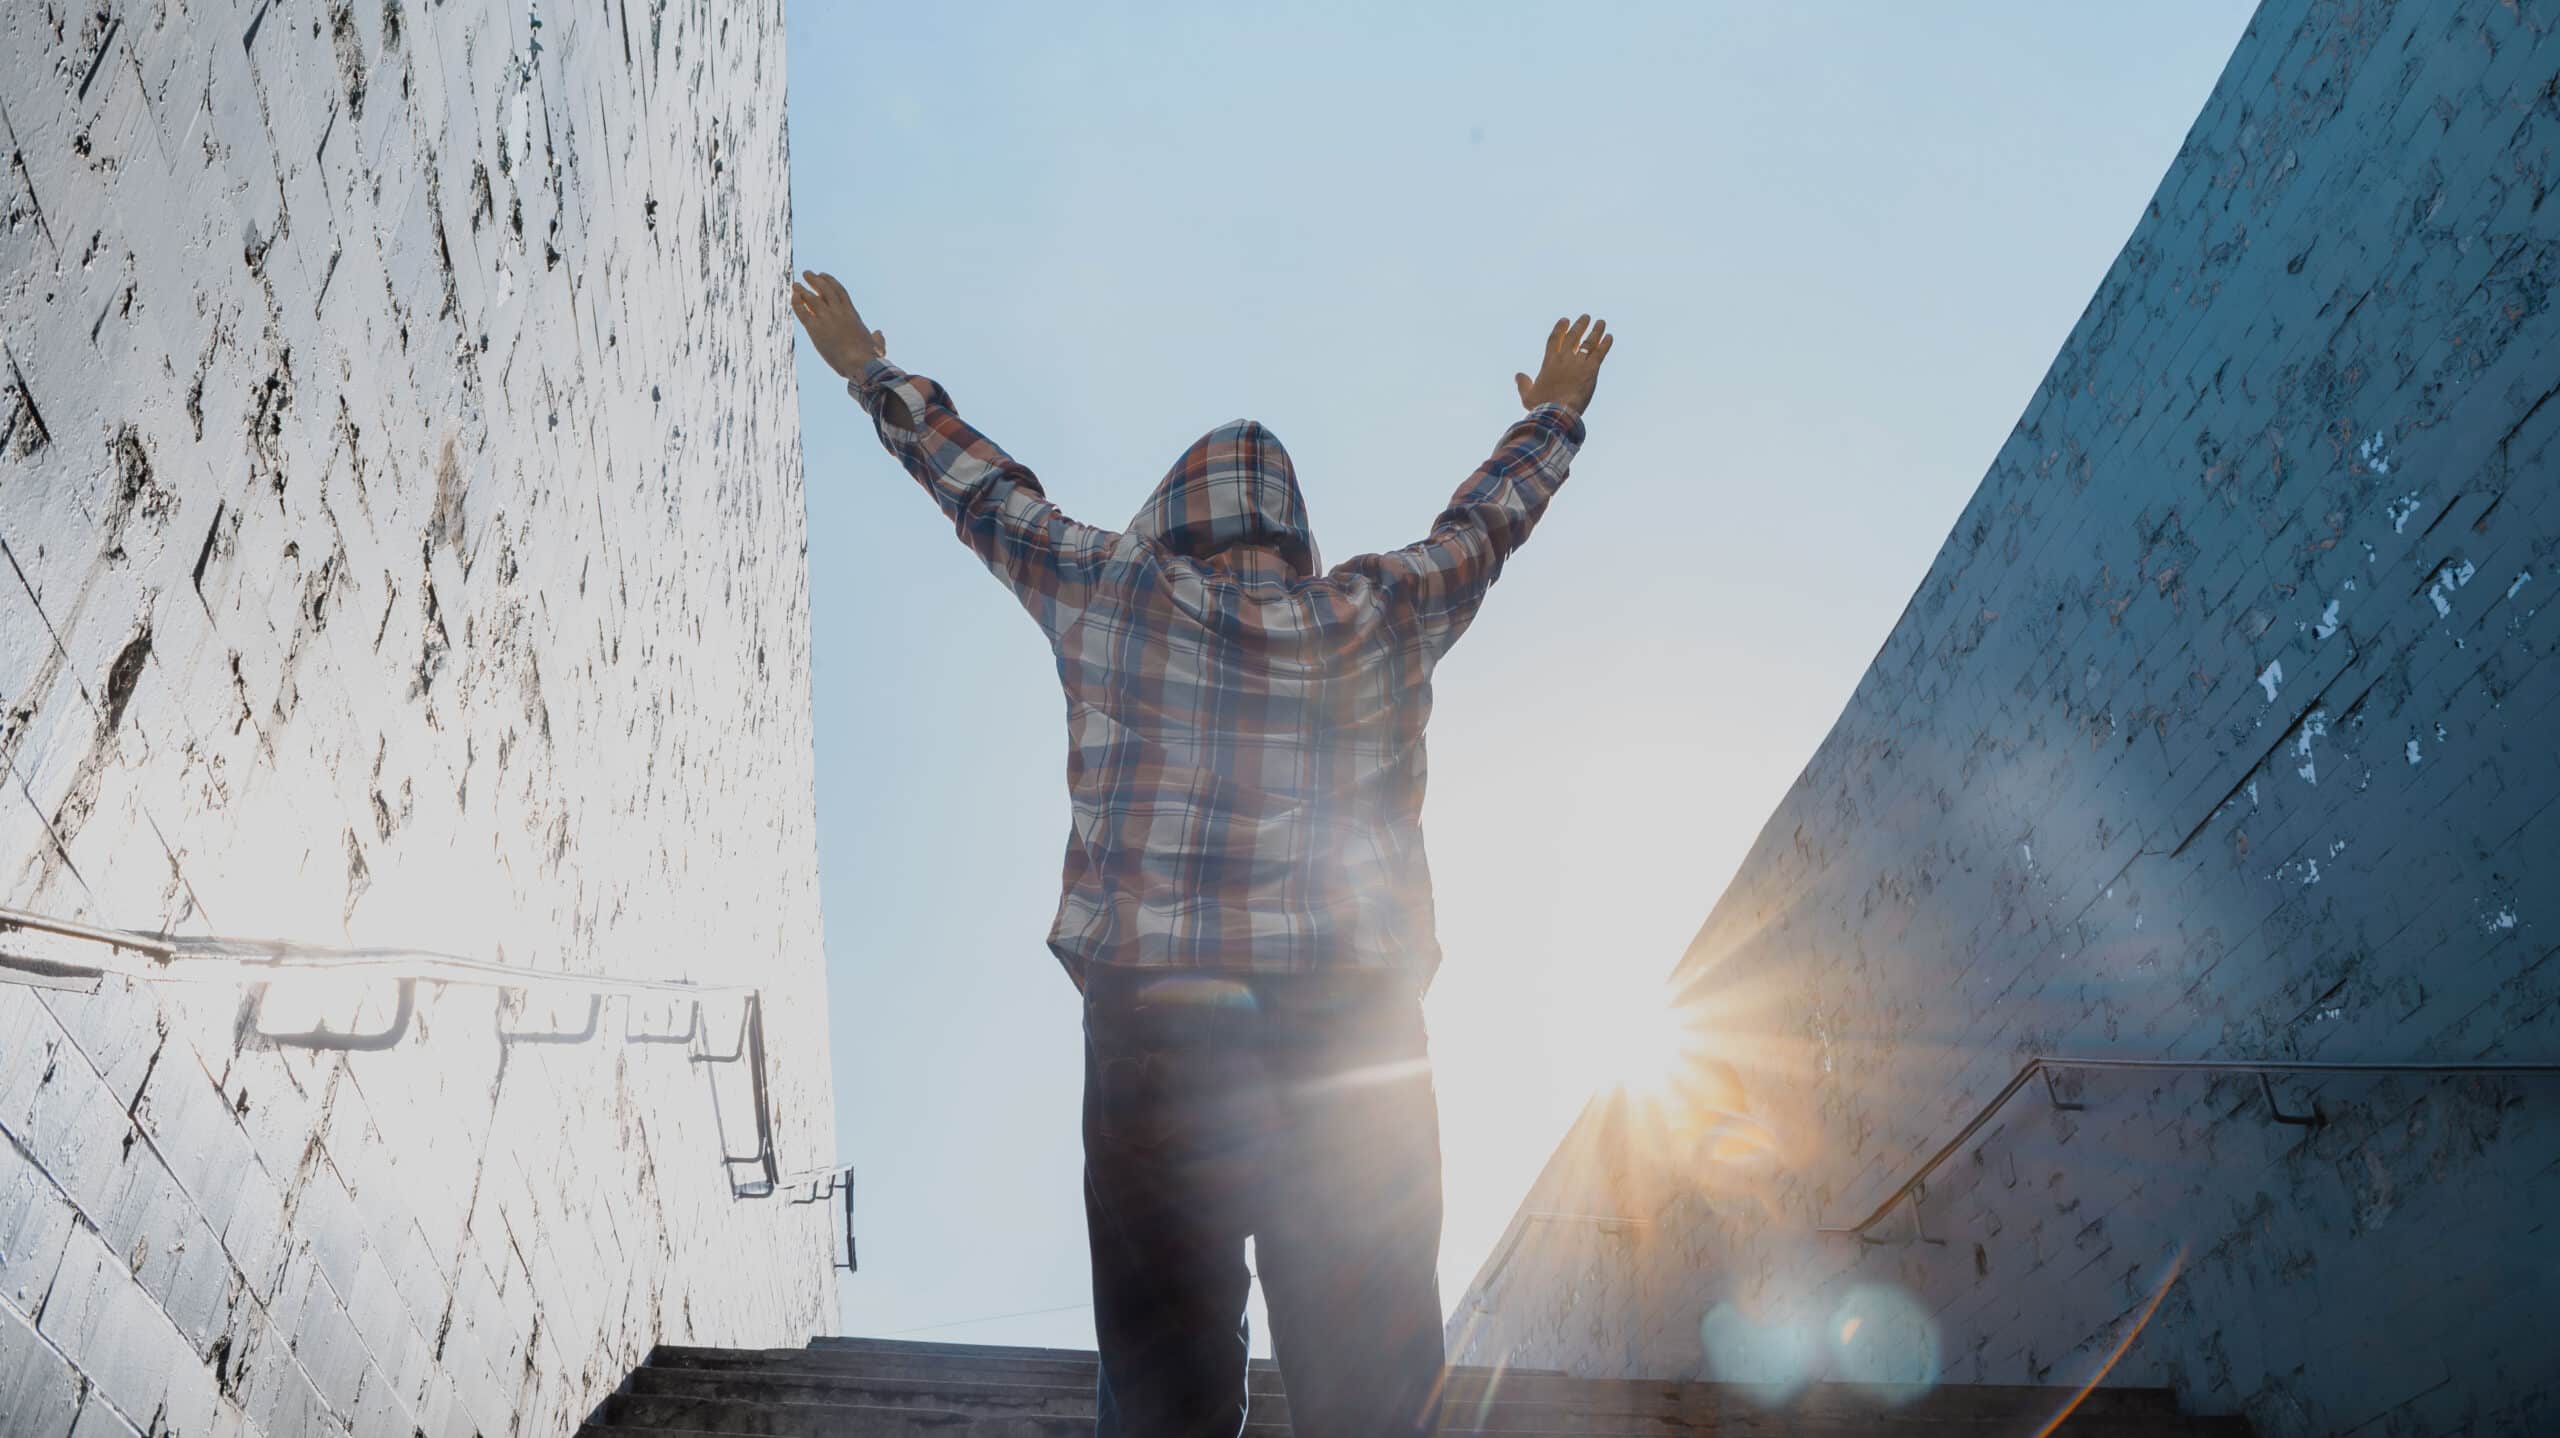 A man triumphantly walks up stairs holding his hands to the sky - How To Rebuild Your Life & Find Purpose After Addiction